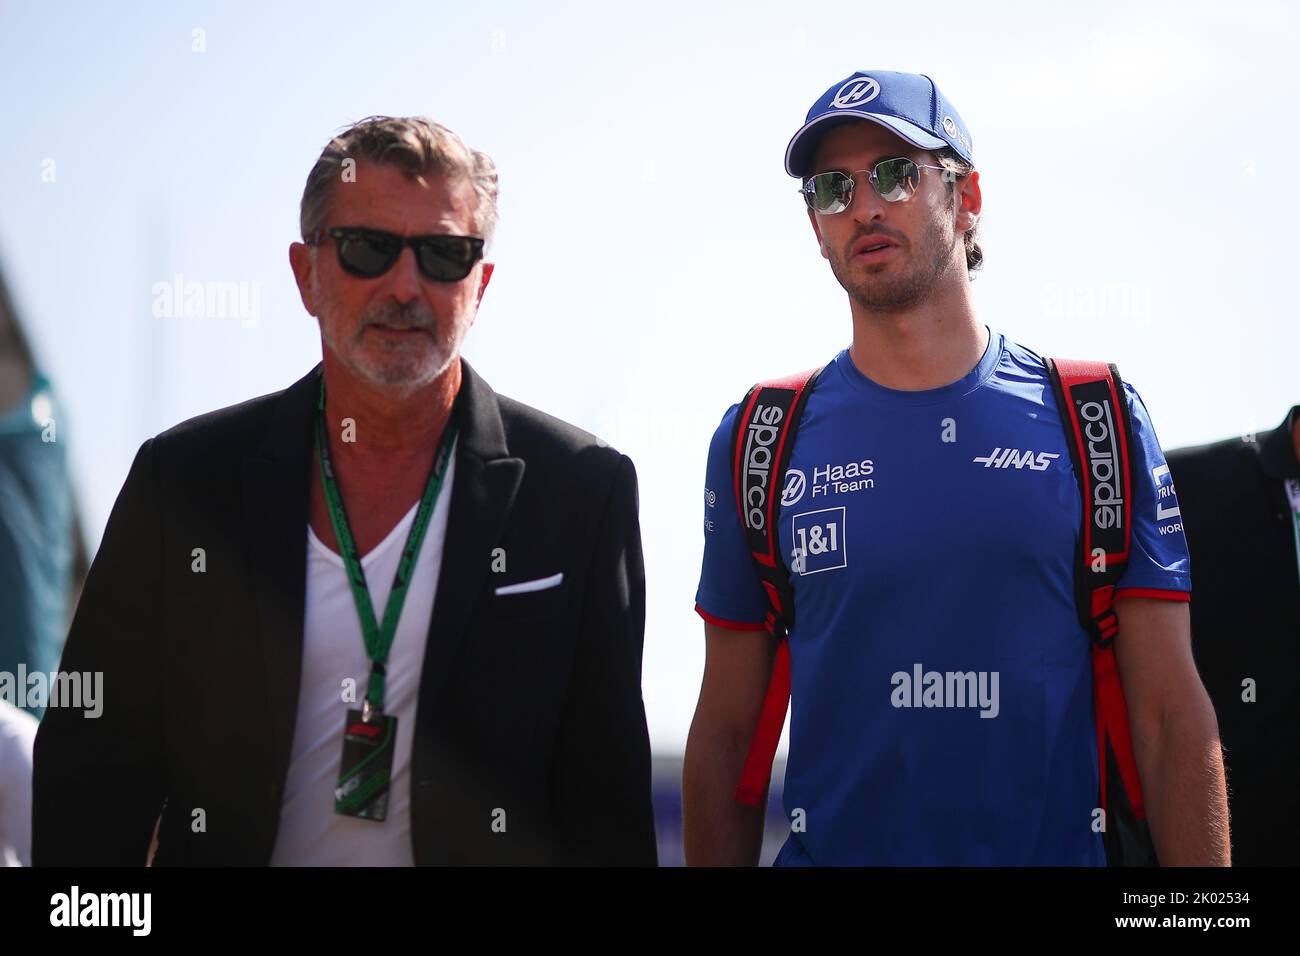 Antonio Giovinazzi with his manager Enrico Zanarini is the Ferrari reserve driver and former f1 driver with Alfa Romeo Sauber, drive for Haas F1 Team during the Italian GP, 8-11 September 2022 at Monza track, Formula 1 World championship 2022. Stock Photo